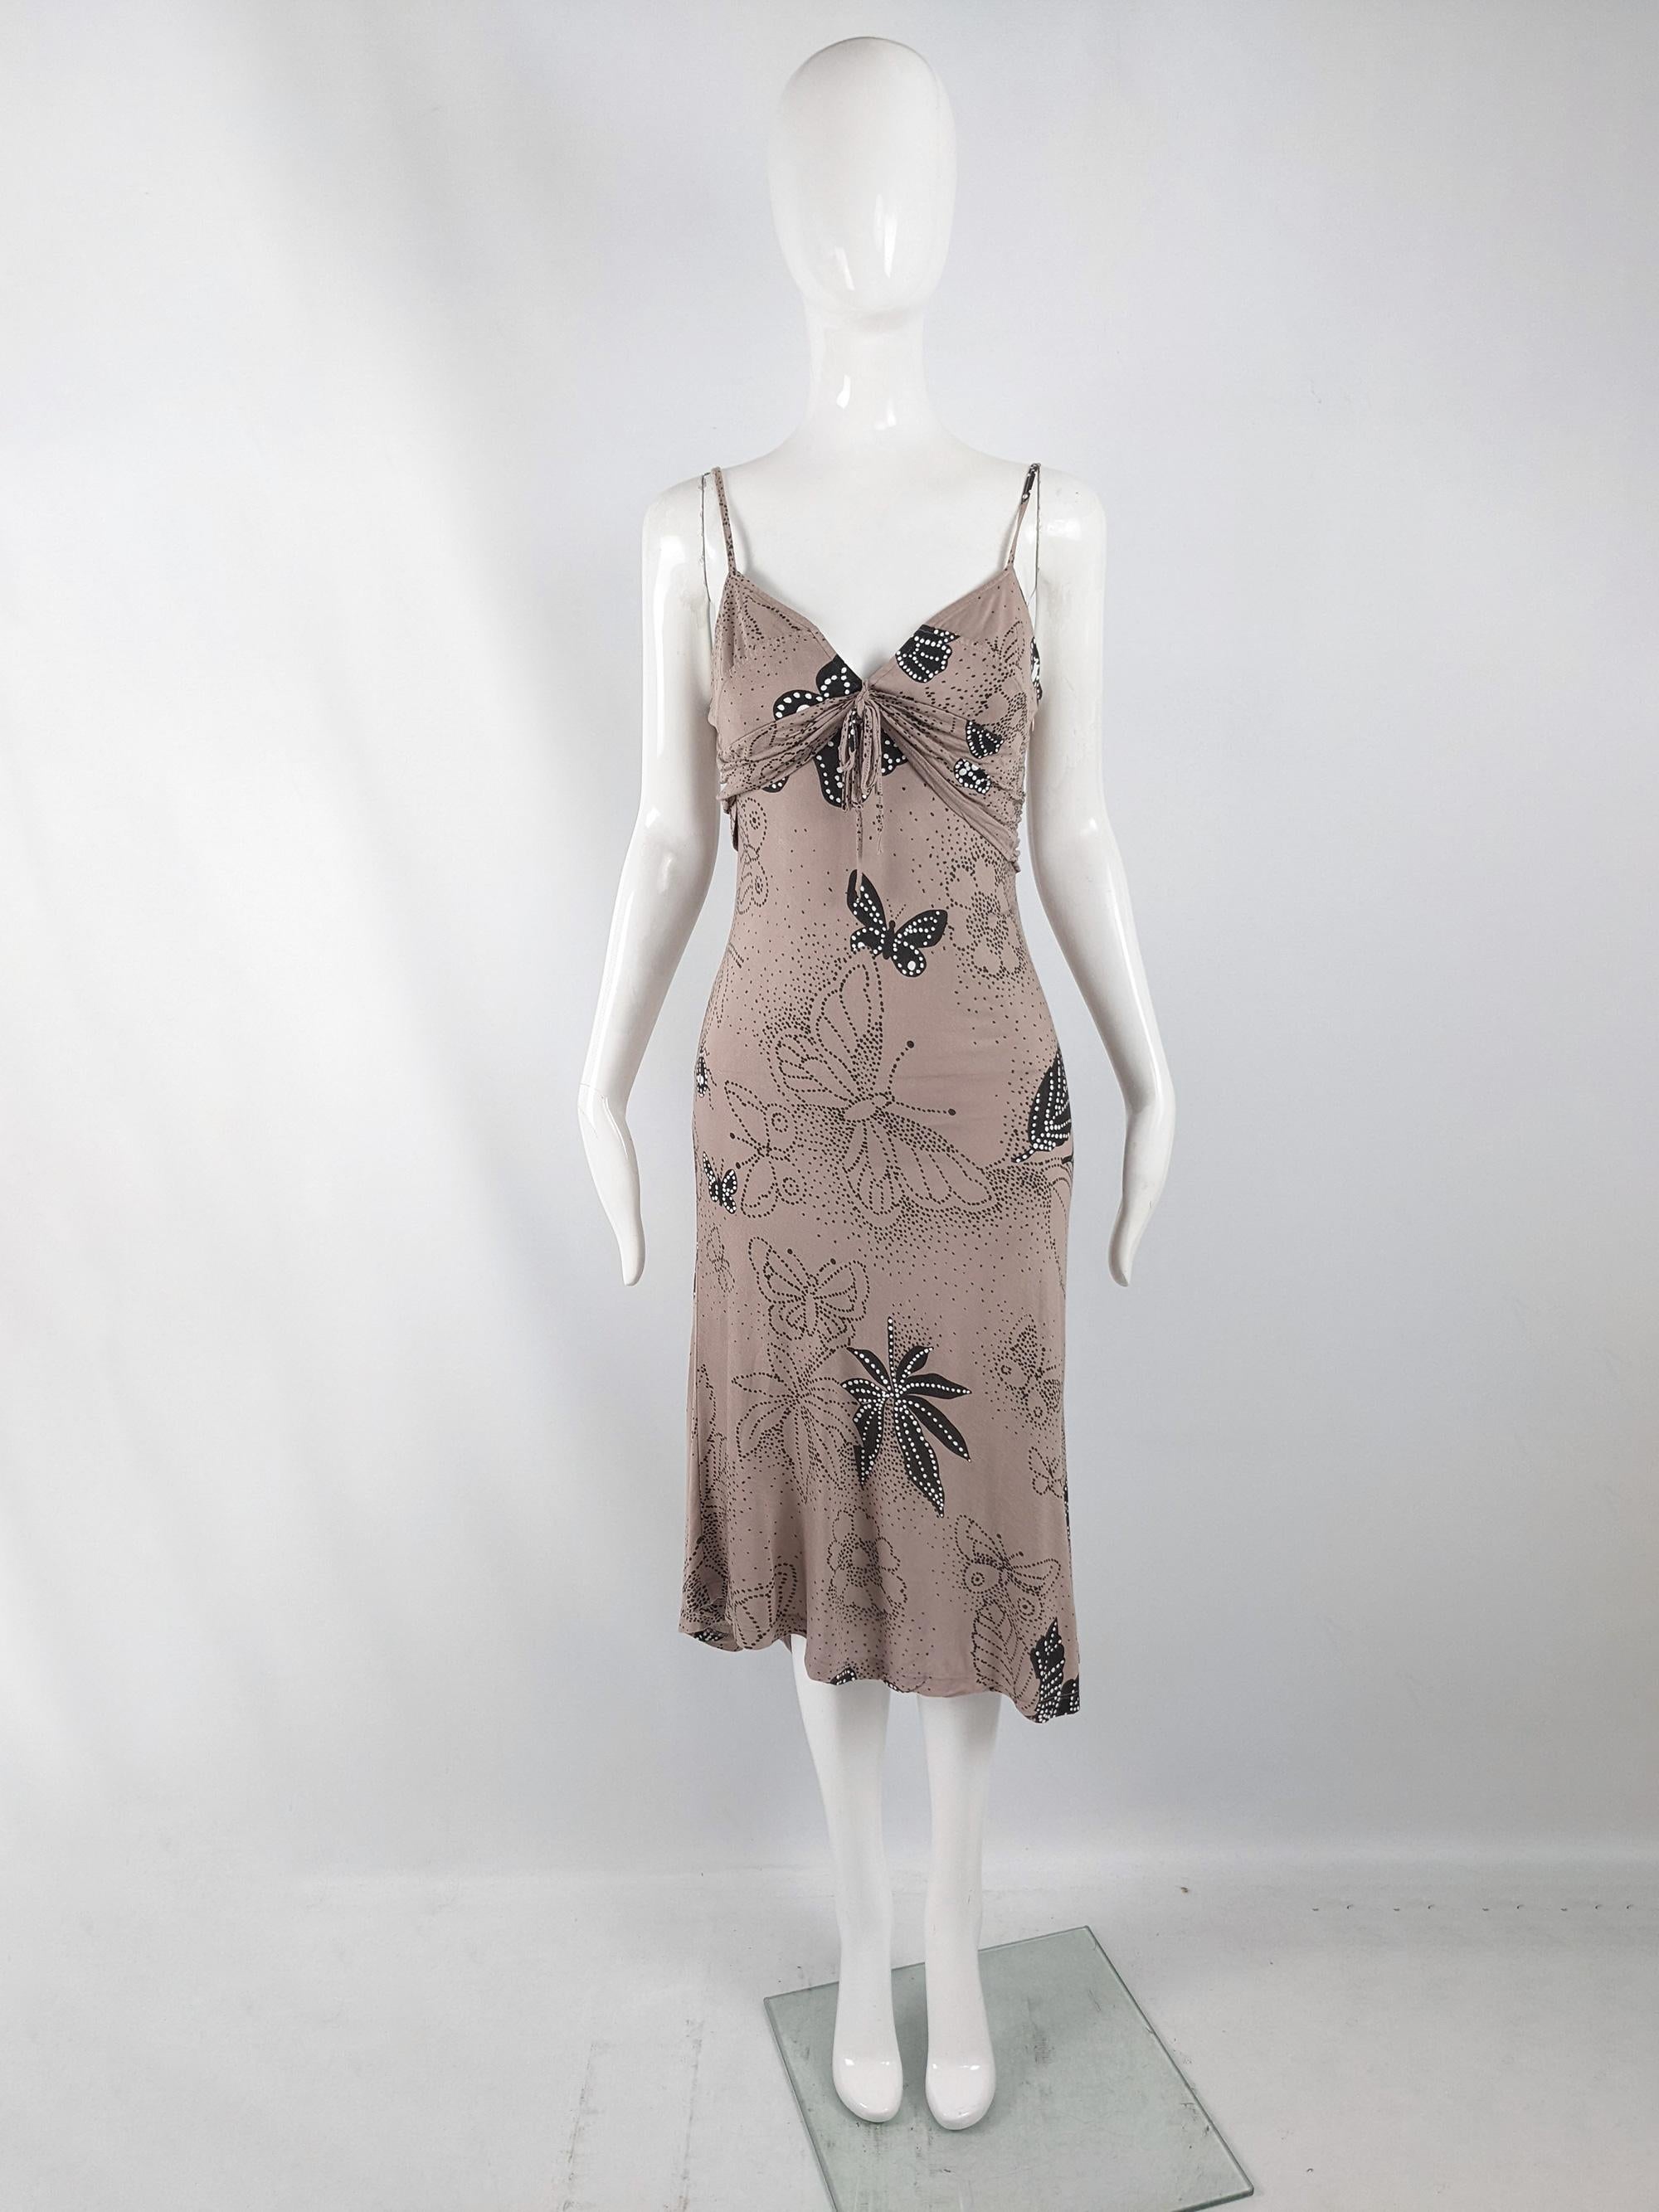 A sexy vintage womens dress from the late 90s by luxury British fashion house, Joseph. In a pinkish beige, bias cut rayon jersey fabric with a black and white floral and butterfly print throughout.

Size: Marked IT42 which equates to a UK 10/ US 6/